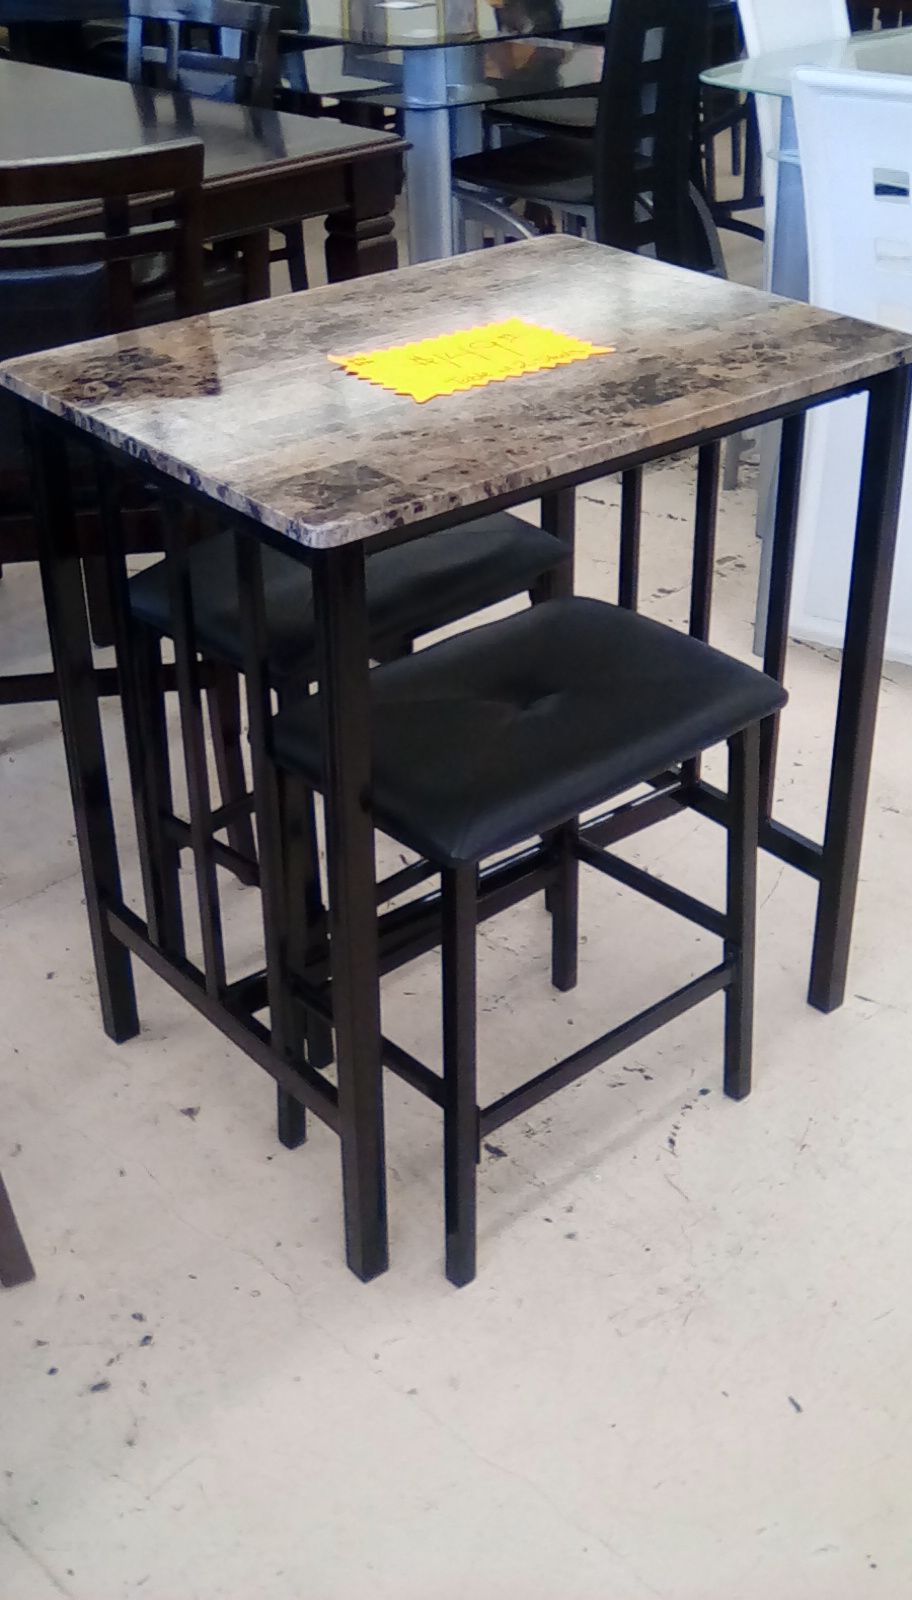 $88 Brand new bar table with two stools